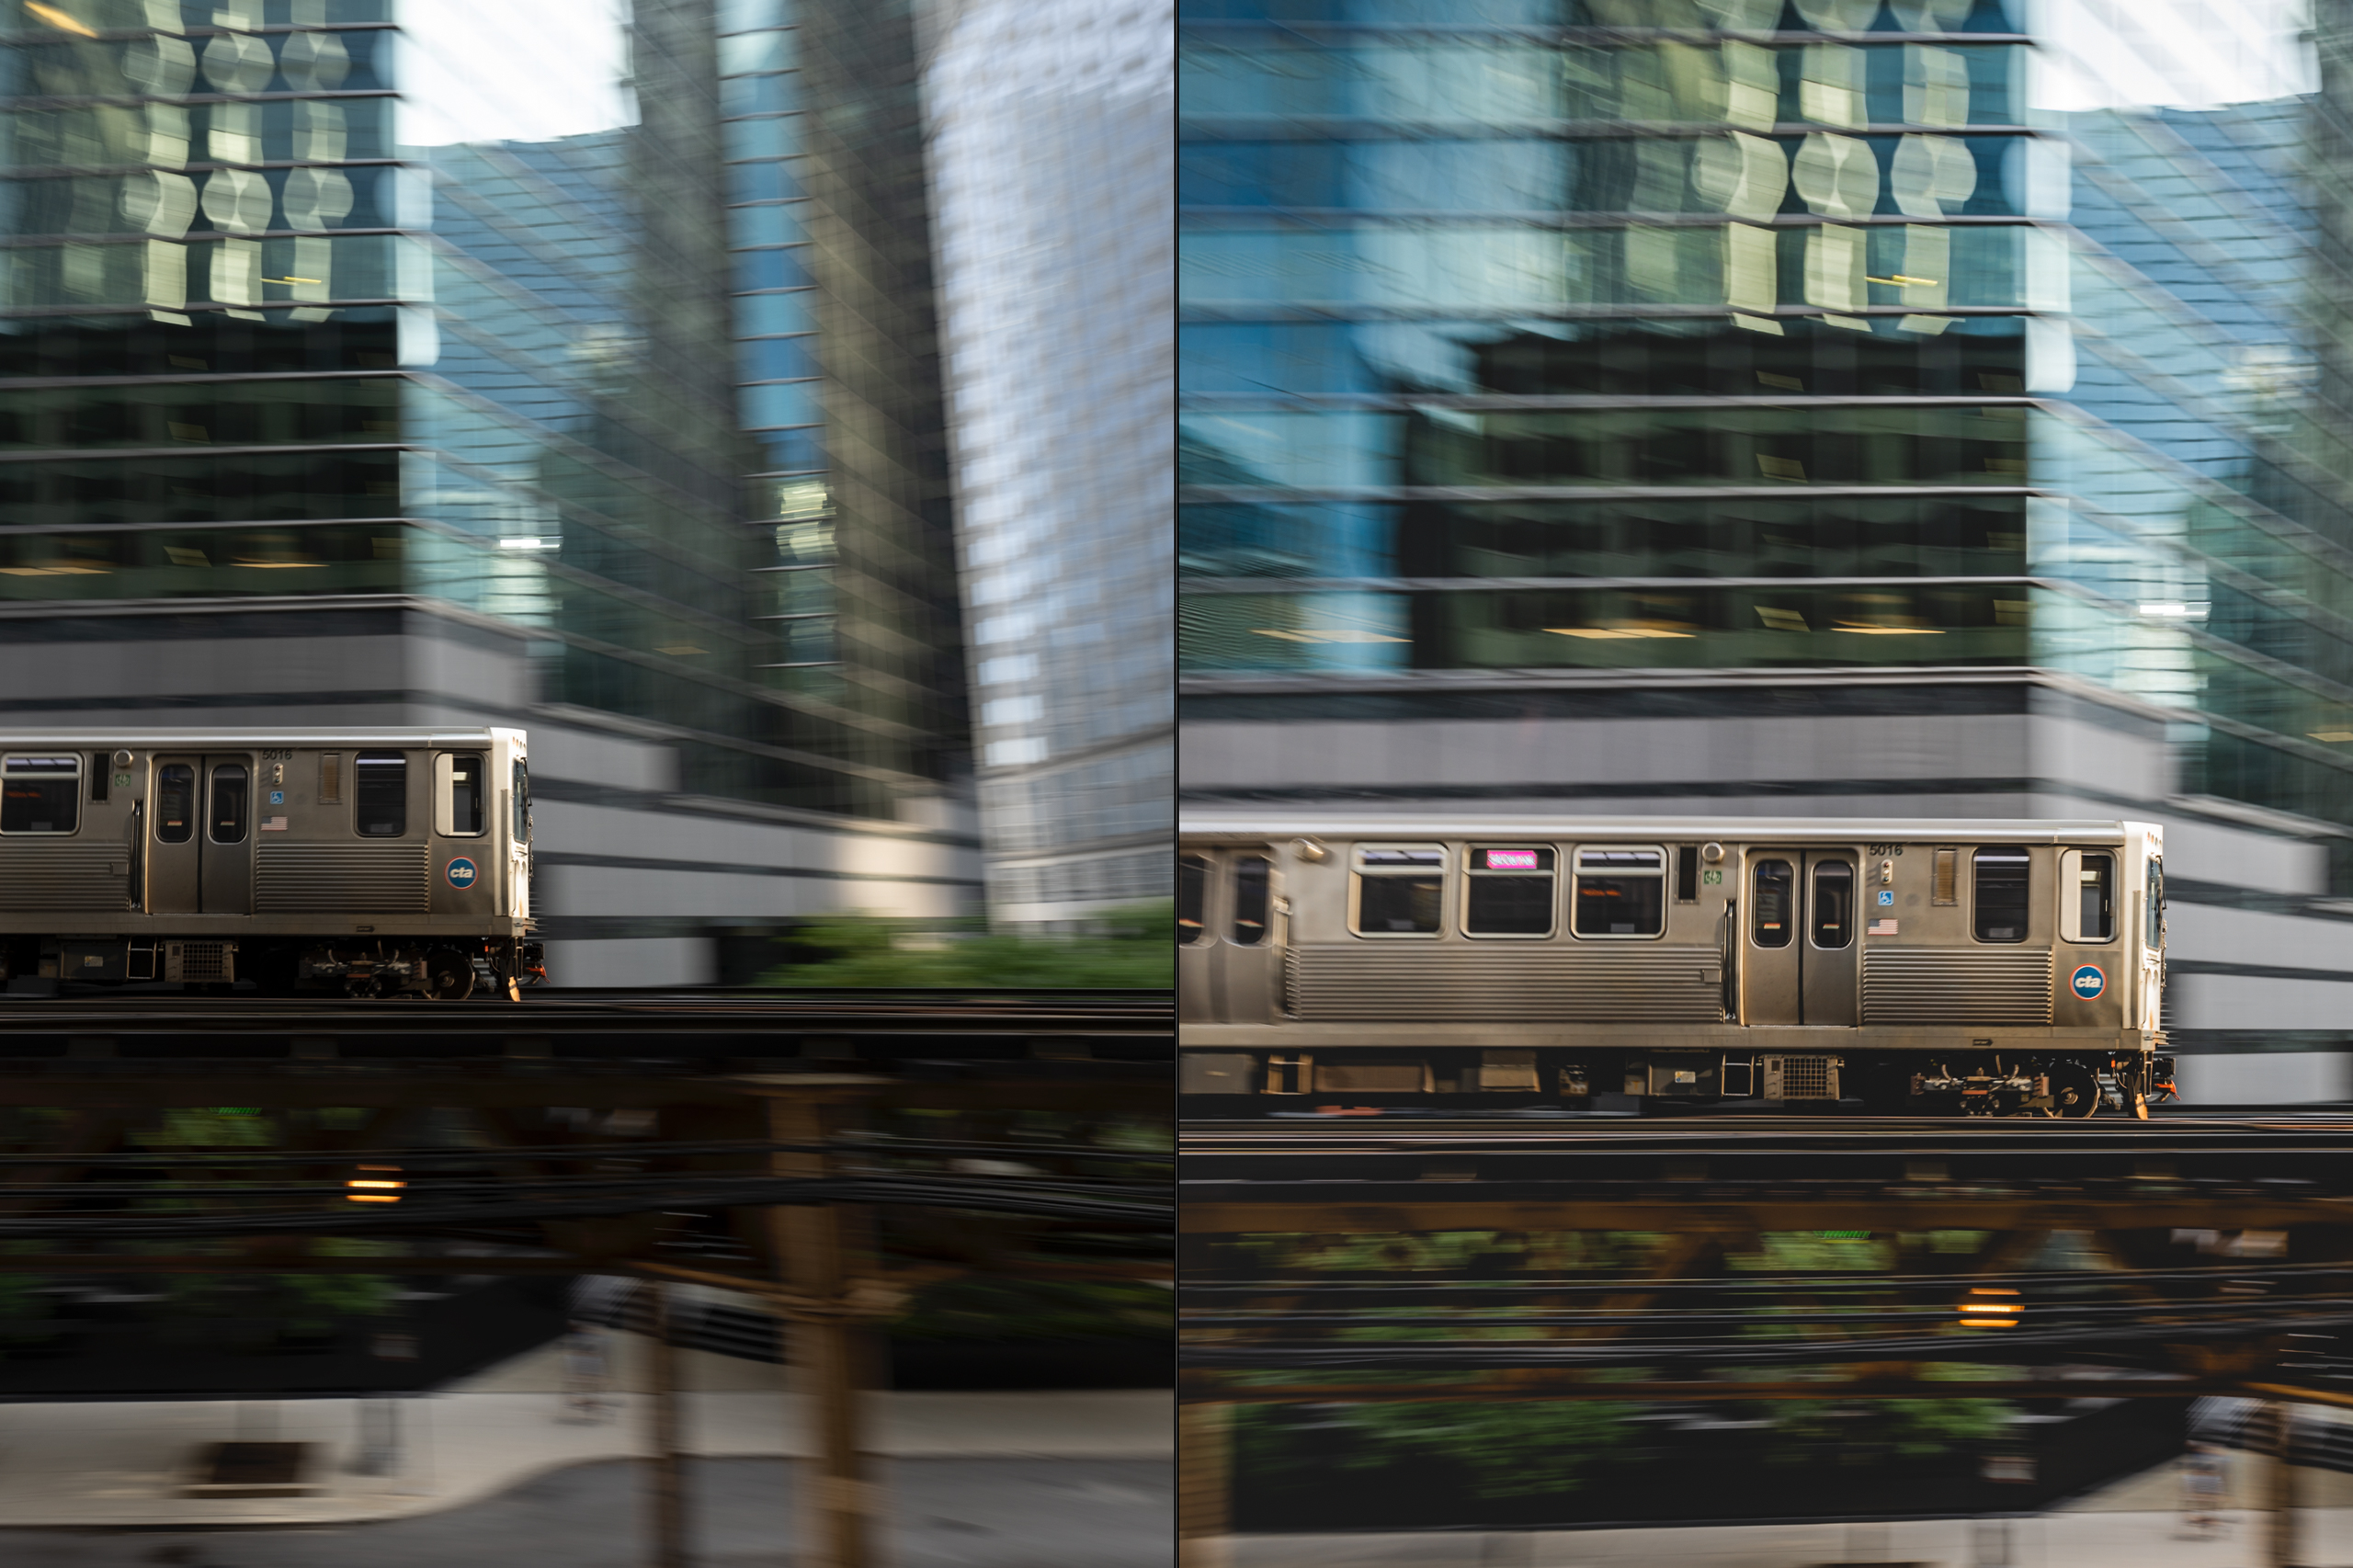 Accentuating Motion Blur Effects, Tutorial